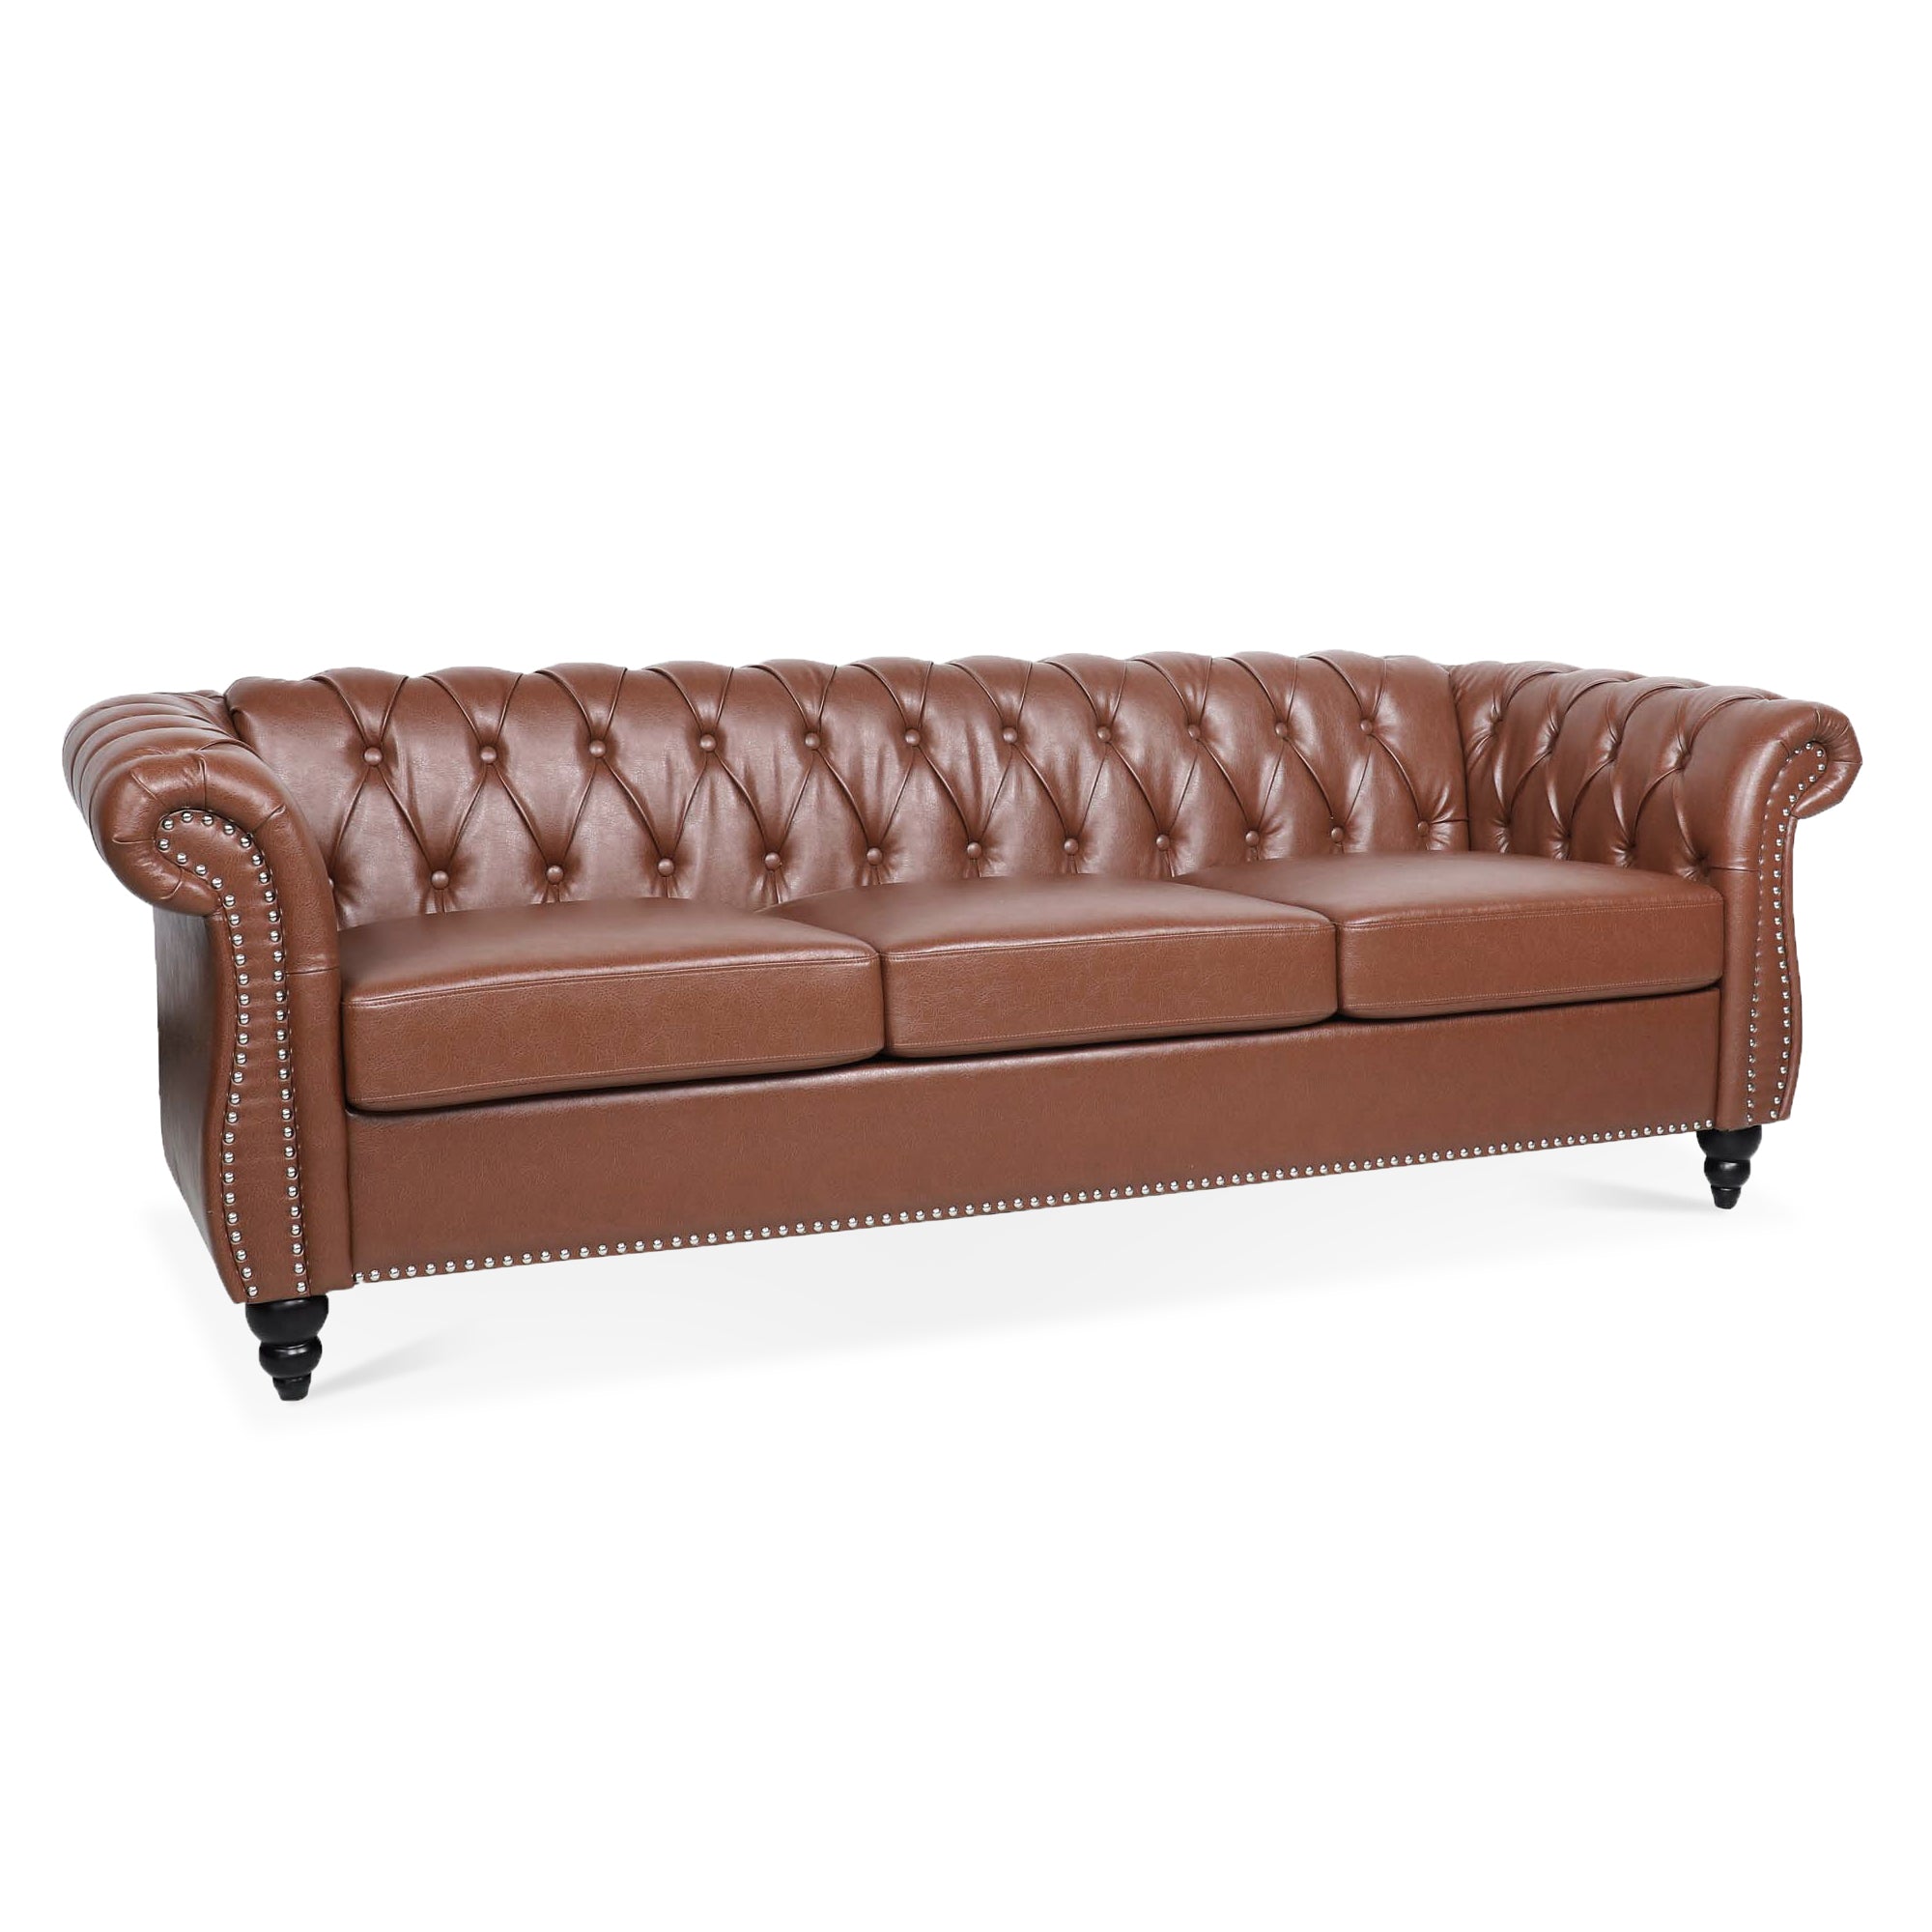 84" Cognac Faux Leather Chesterfield Sofa With Nailhead Trim